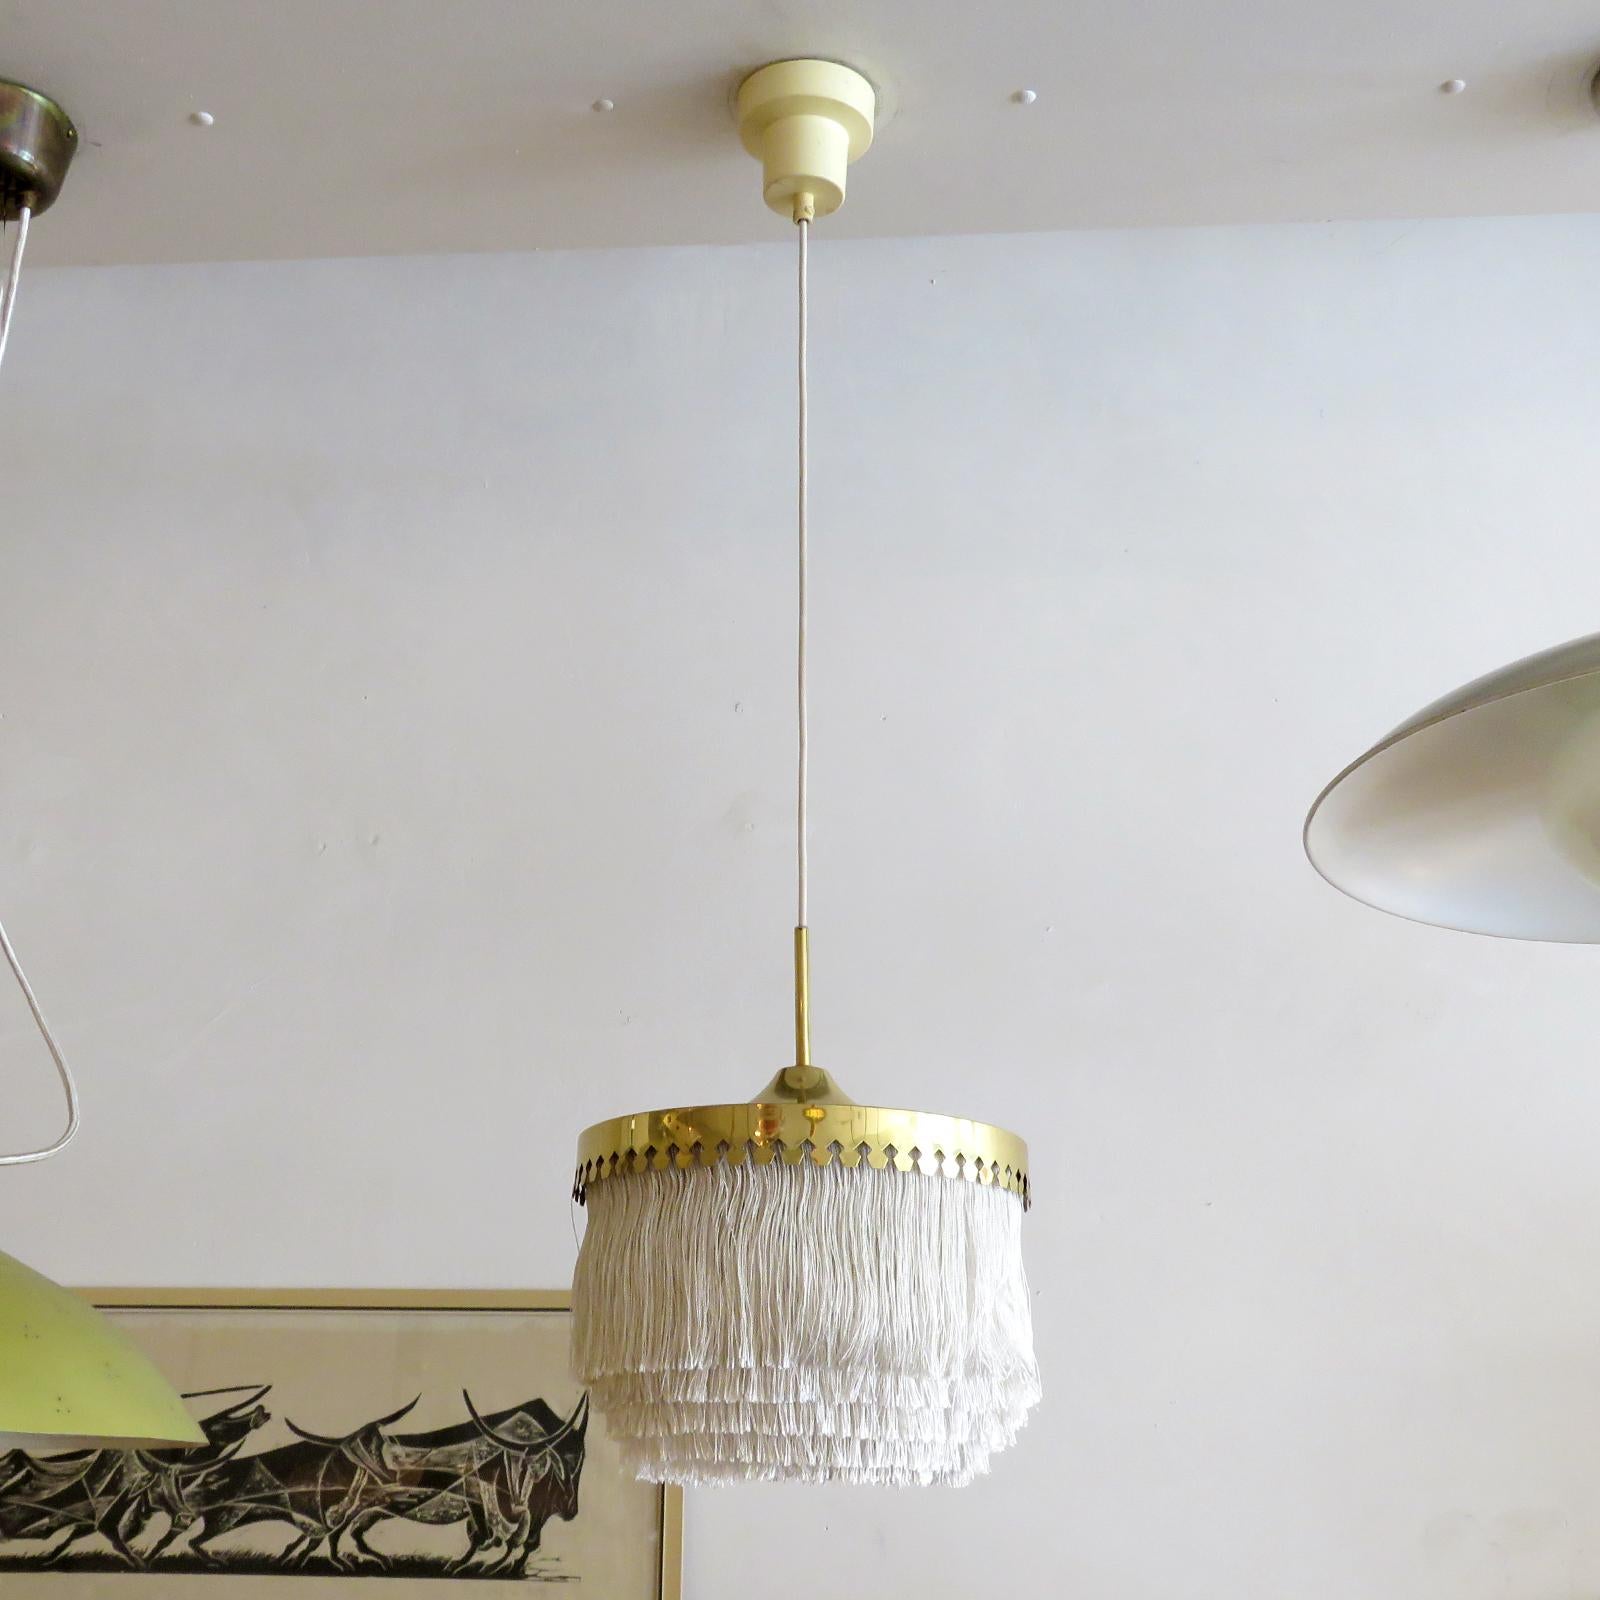 Wonderful pendant lamp by Hans-Agne Jakobsson for Markaryd, Sweden, 1960, with five tiers of off-white fringe silk cord with brass hardware frame and original white canopy. Overall drop can be customized. Custom back plate for US j-boxes, wired for